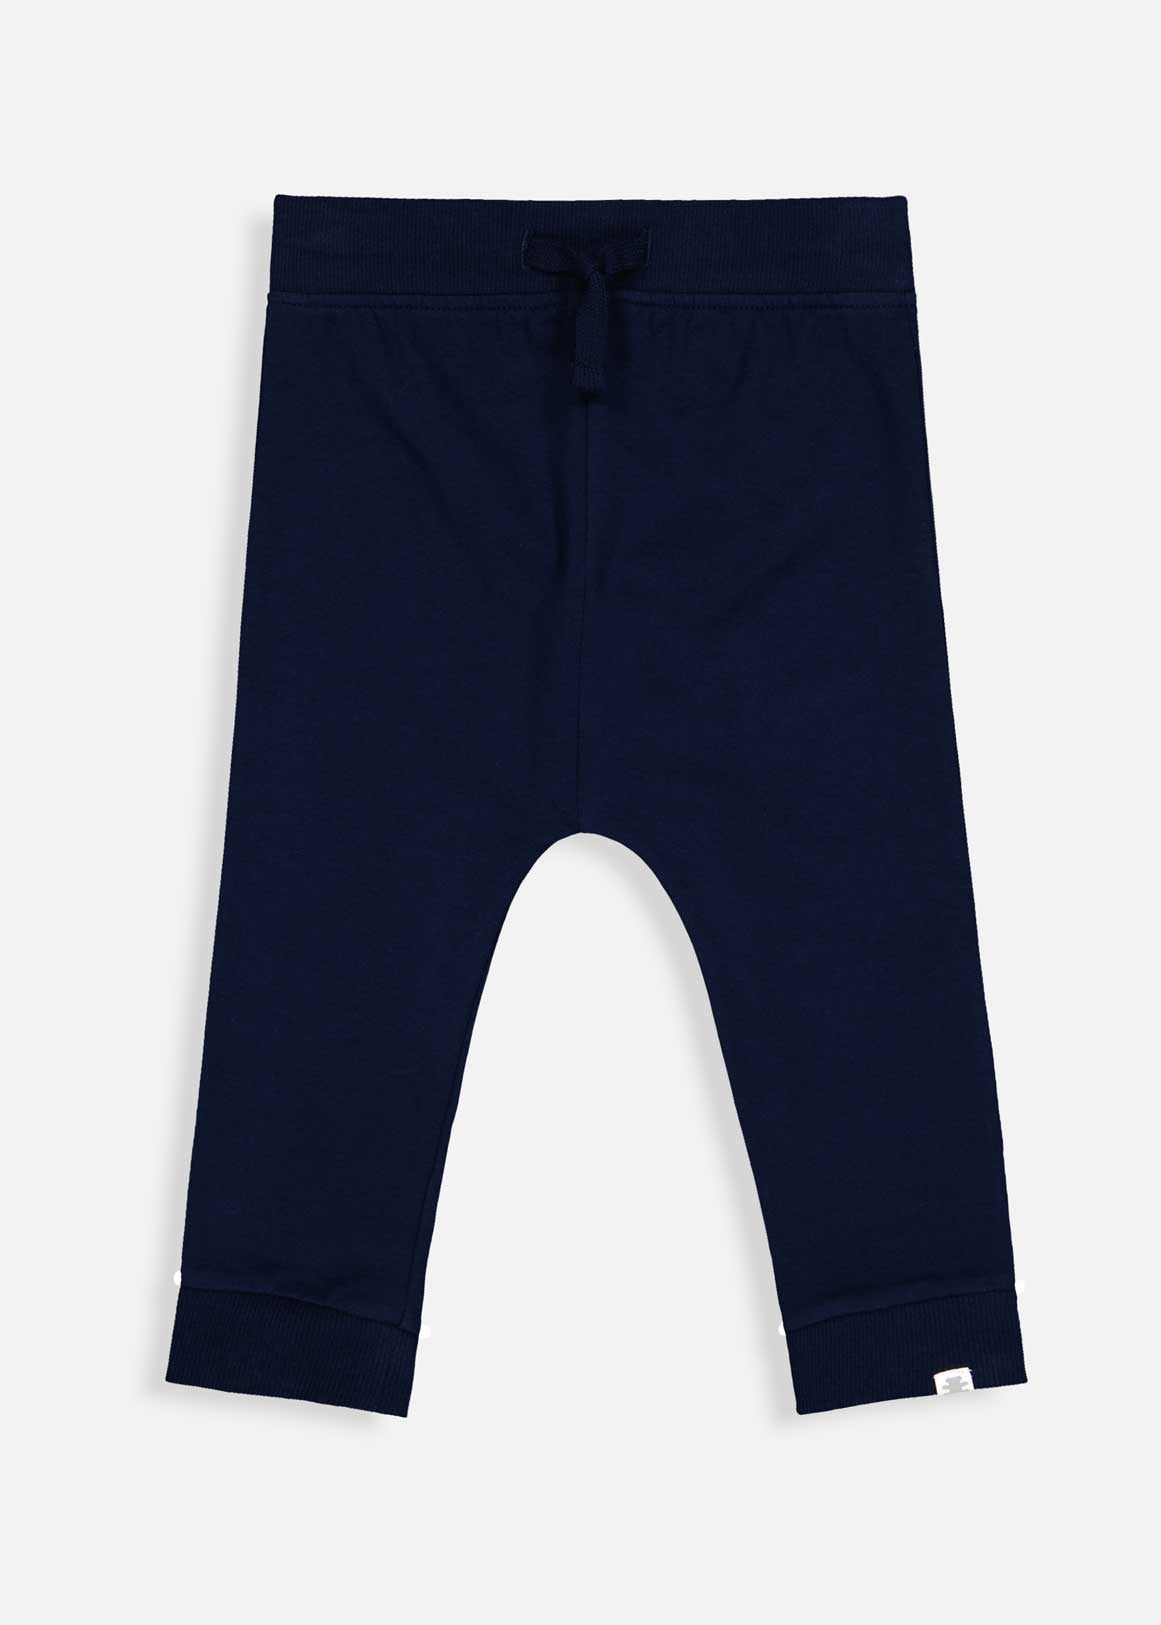 PLAIN NAVY ENTRY SWE - Woolworths Mauritius Online